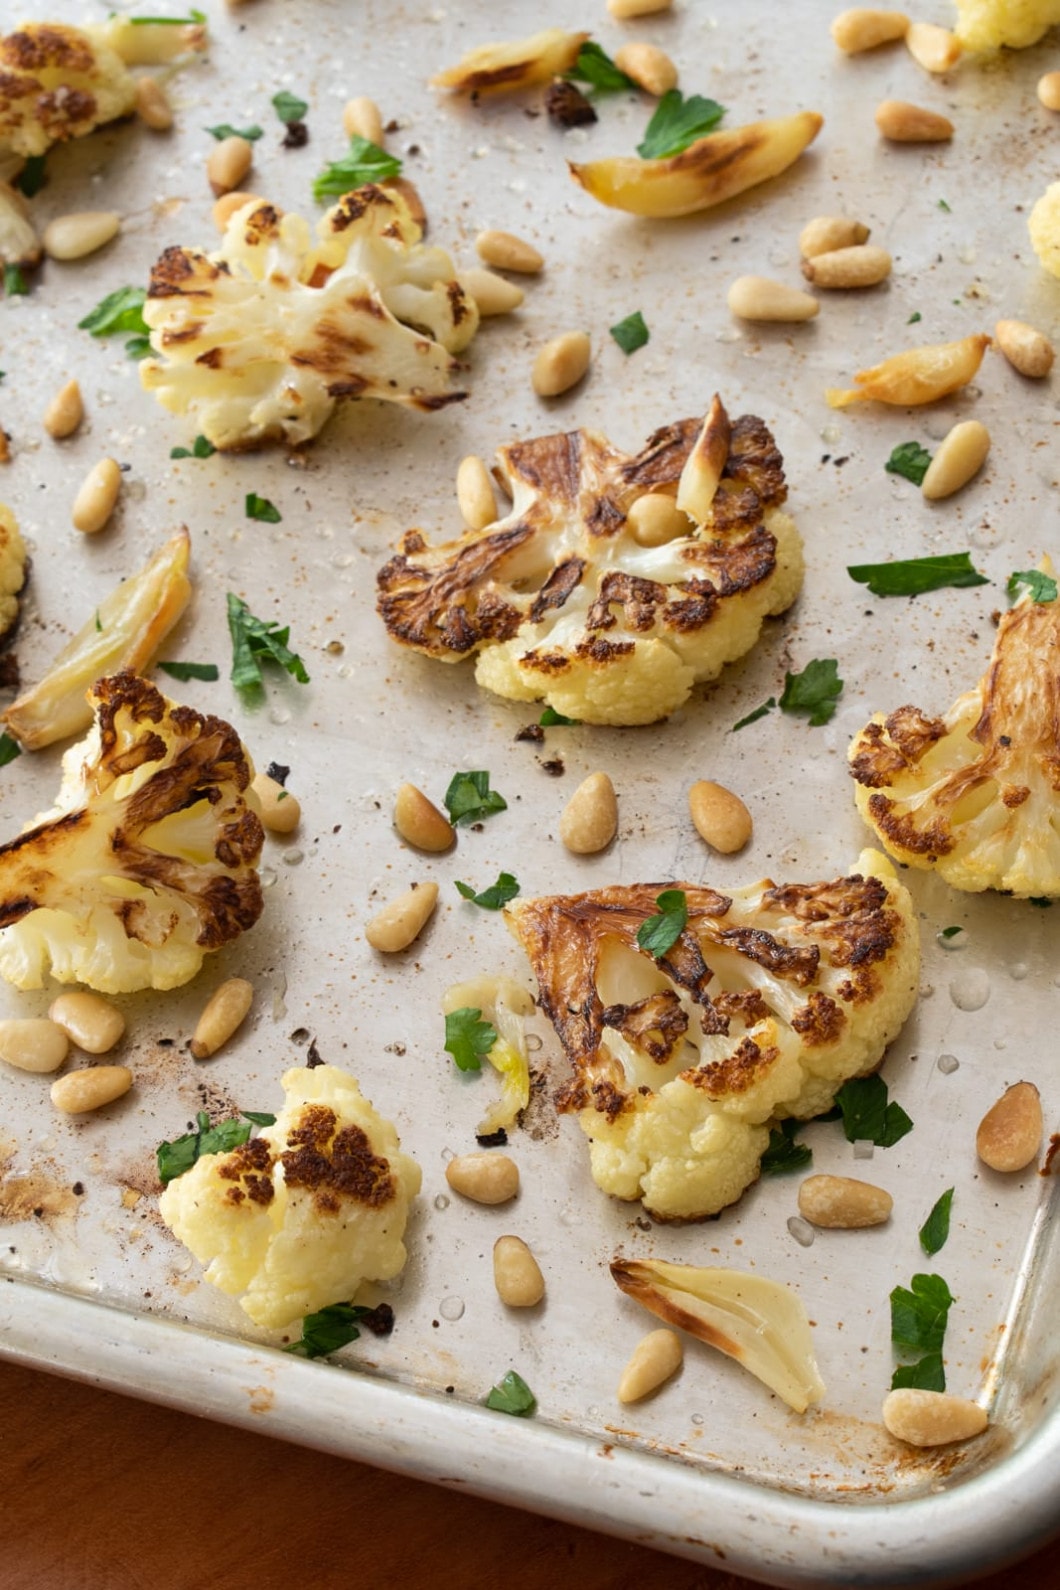 Roasted Cauliflower with Garlic and Pine Nuts